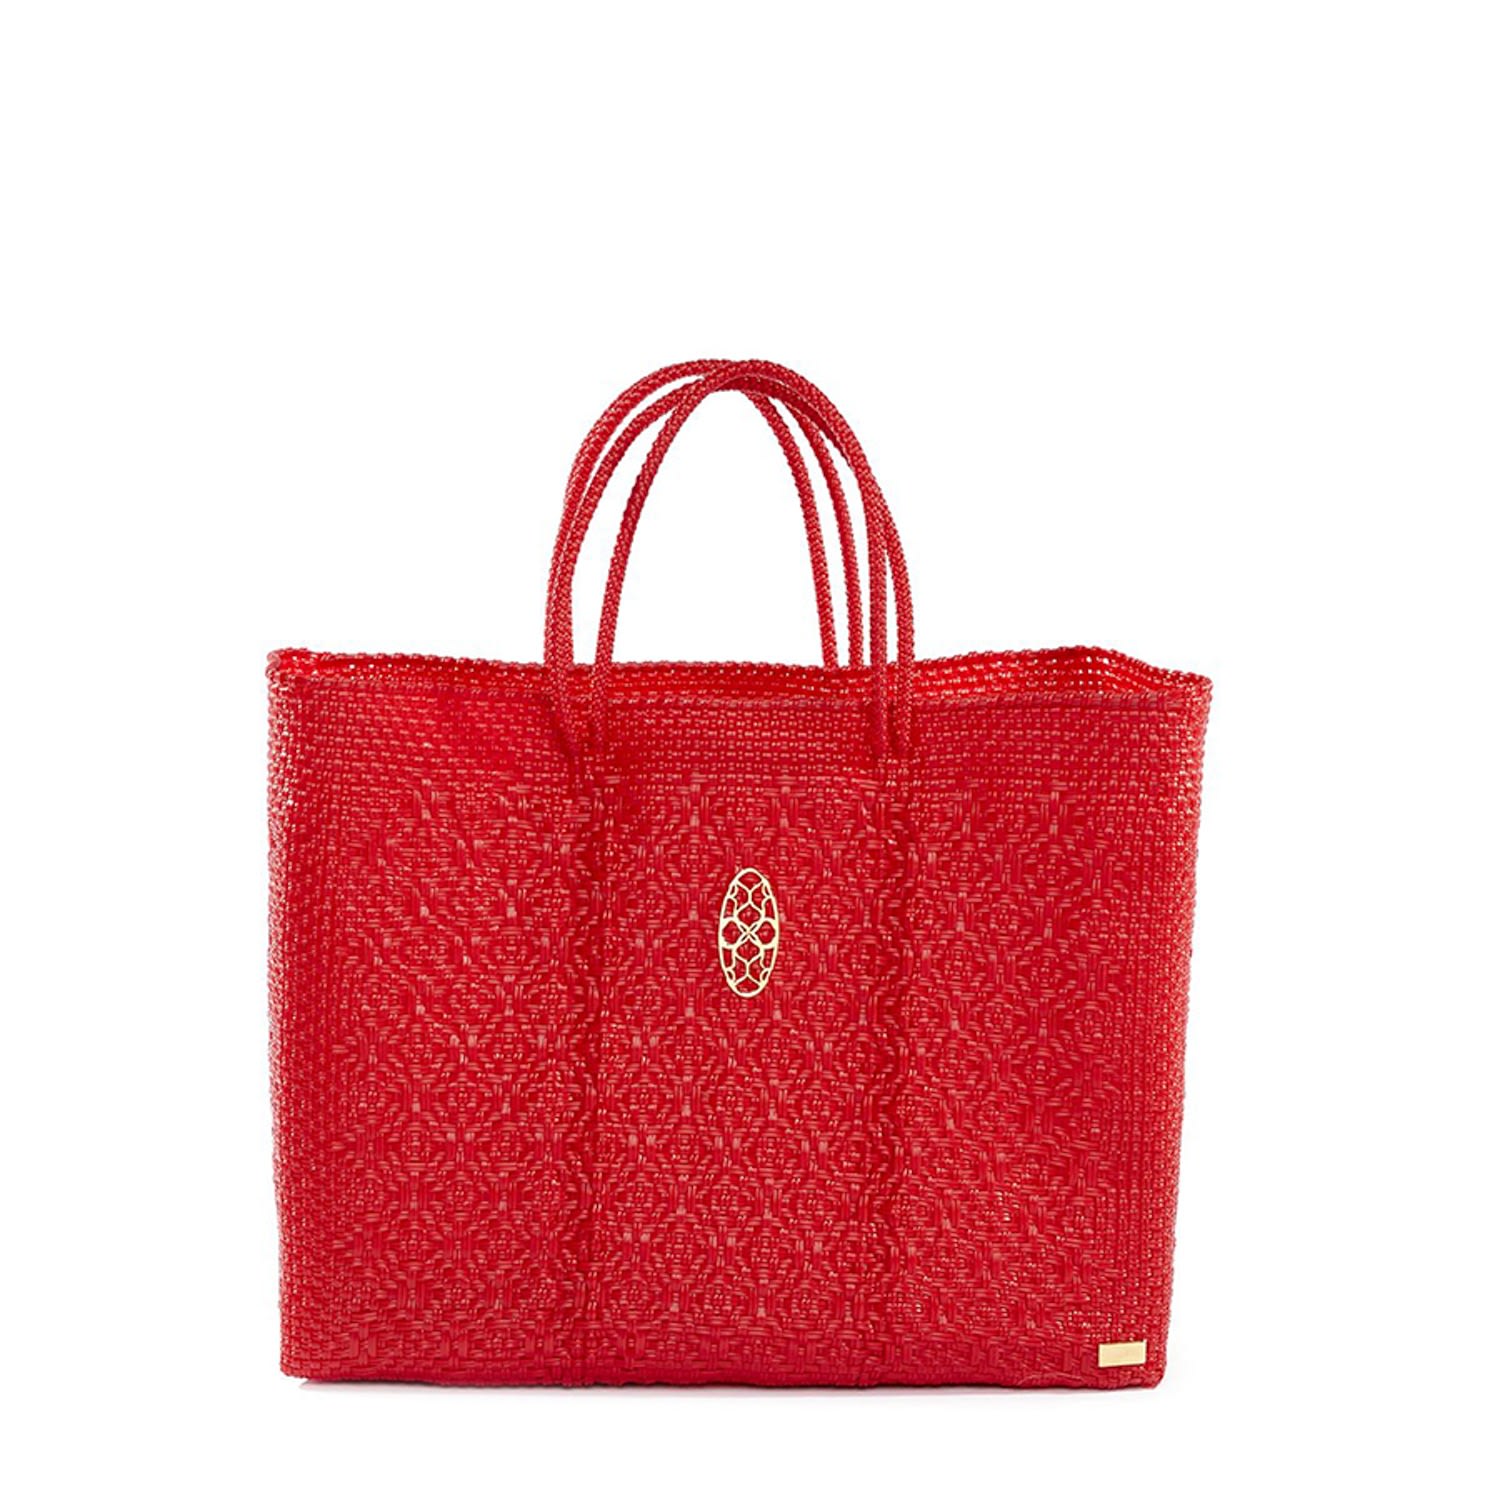 Women’s Red Book Tote Bag With Clutch Lolas Bag